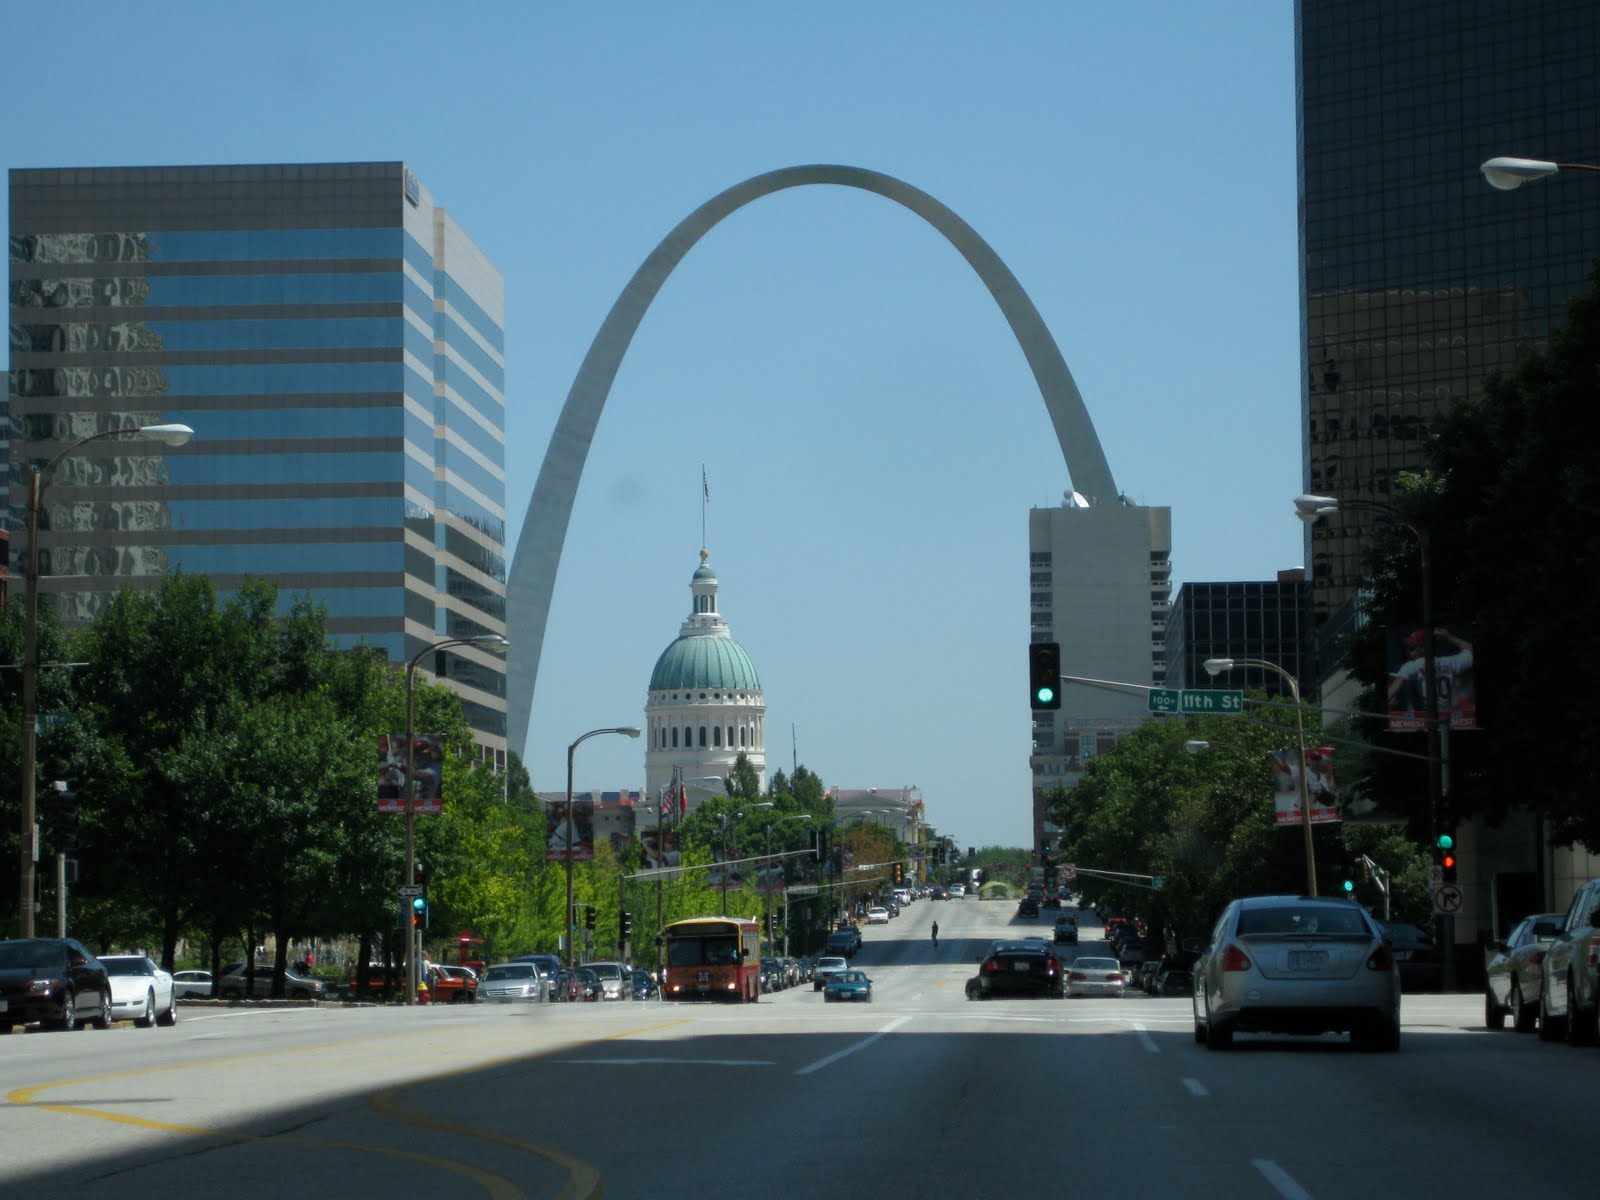 Popularity Papers: THE BLOG: Day 6: St. Louis